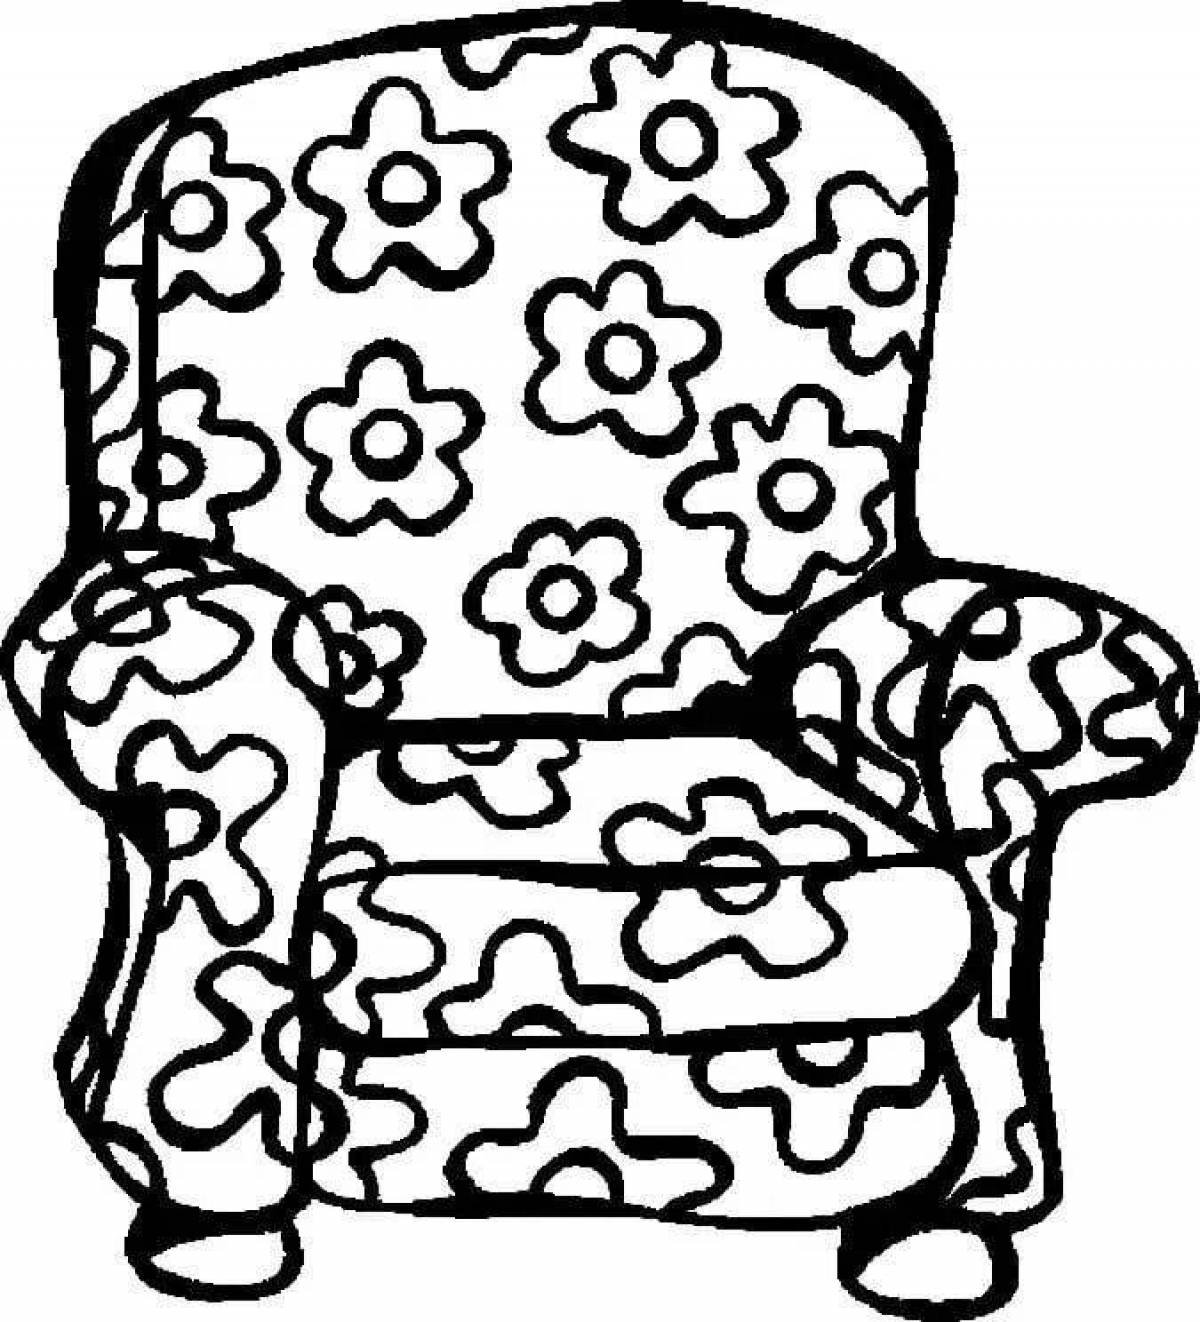 Coloring book joyful chair for children 3-4 years old